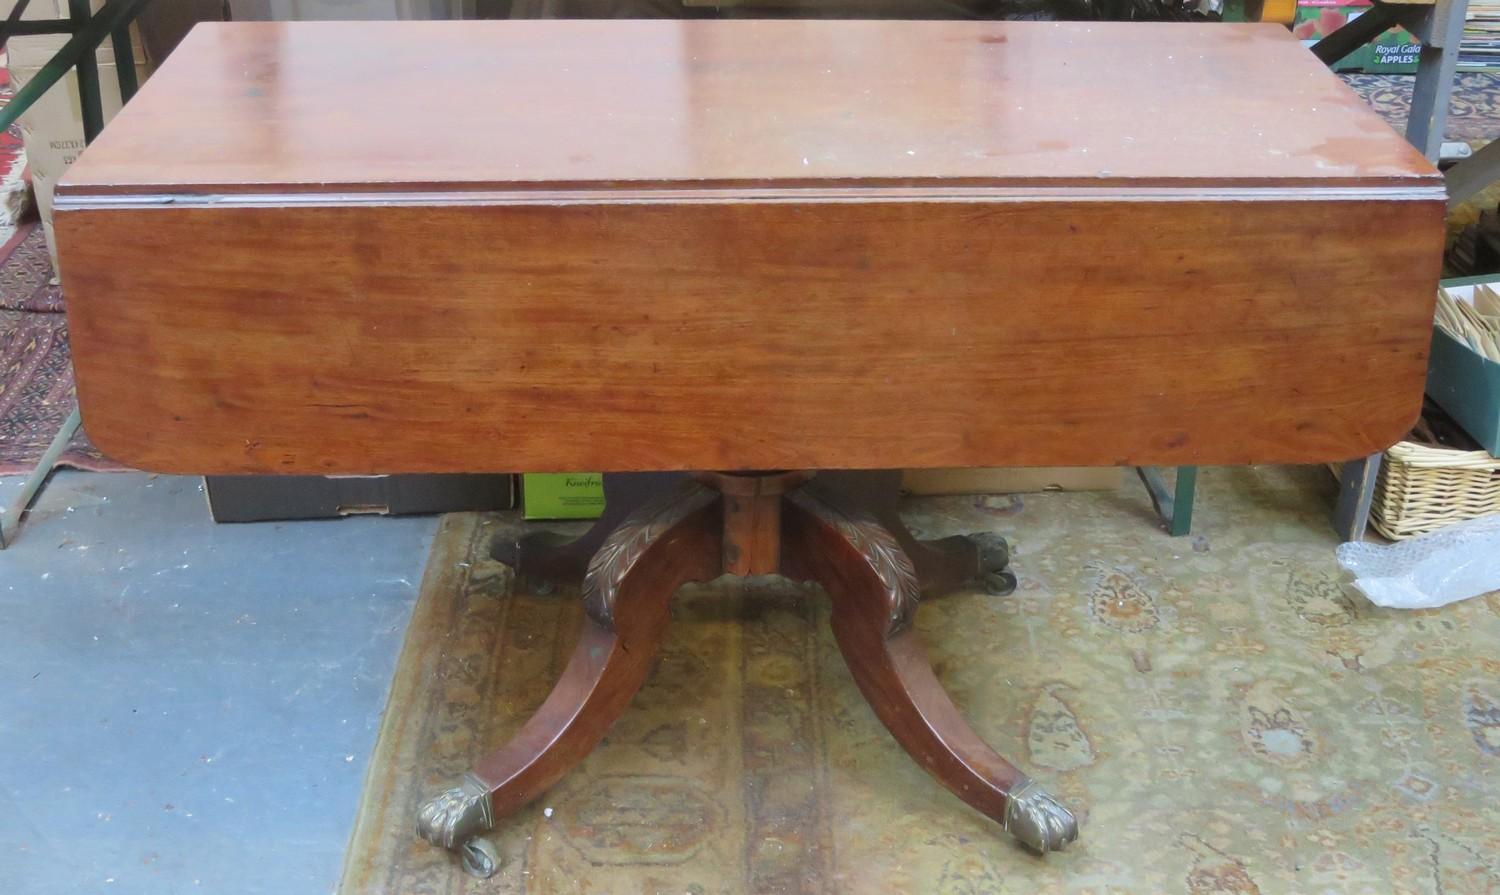 Victorian mahogany drop leaf sofa table, fitted with single drawer, on quadrofoil supports.